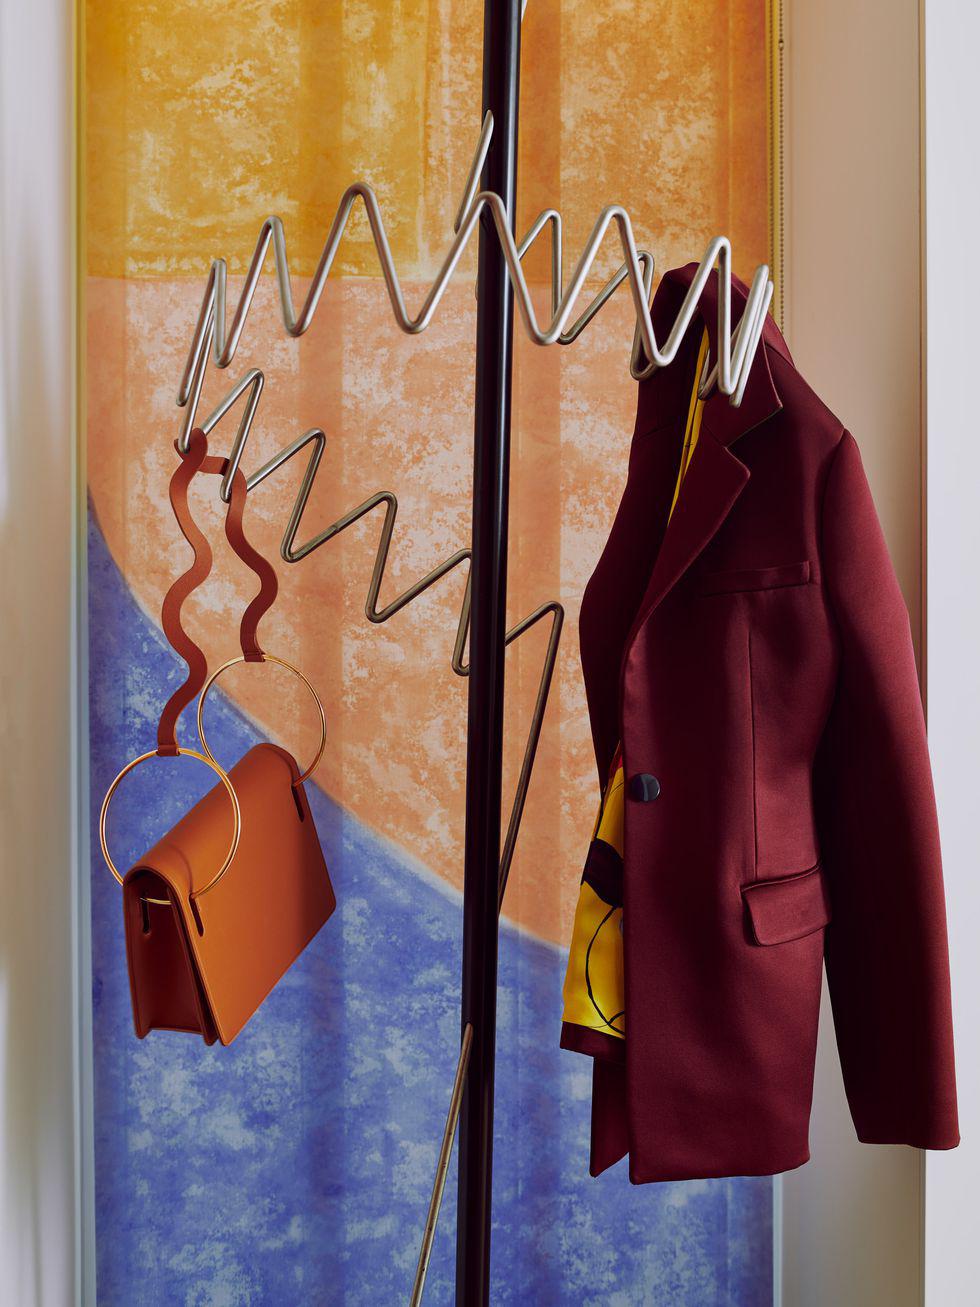 A coat rack from the Netherlands, just one of many sculptural furniture pieces in the apartment. (Photo: Michael Sinclair, styling: Olivia Gregory)